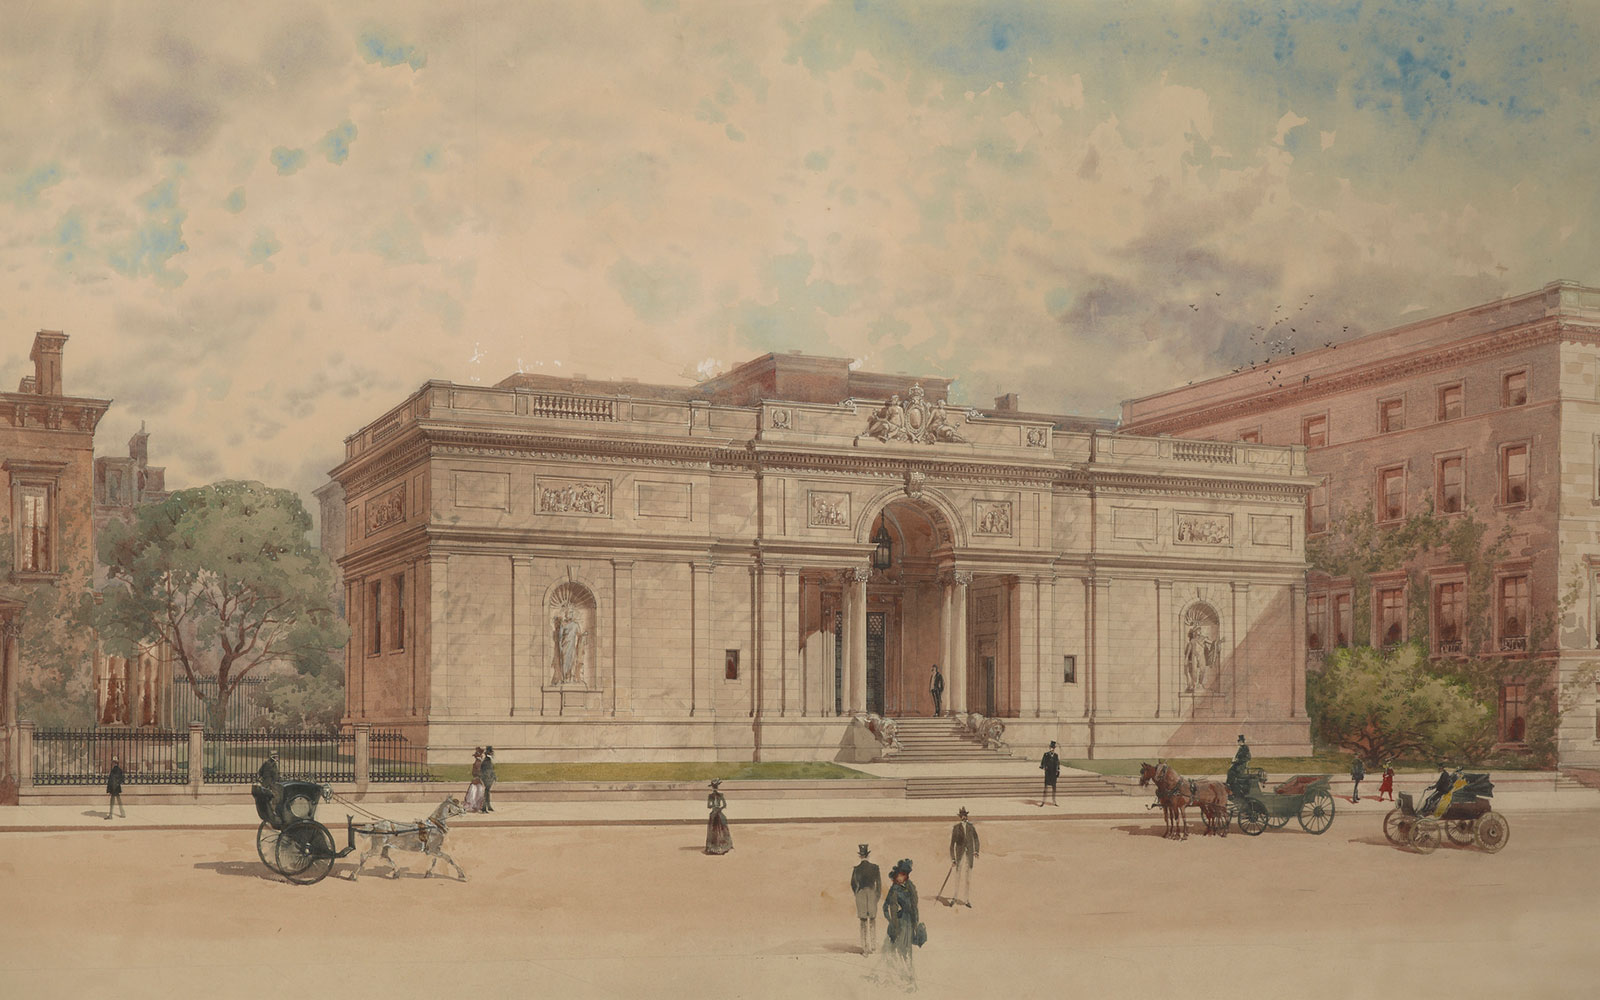 Architectural drawing of J. Pierpont Morgan's Library with open street and figures in foreground and green foliage in background.